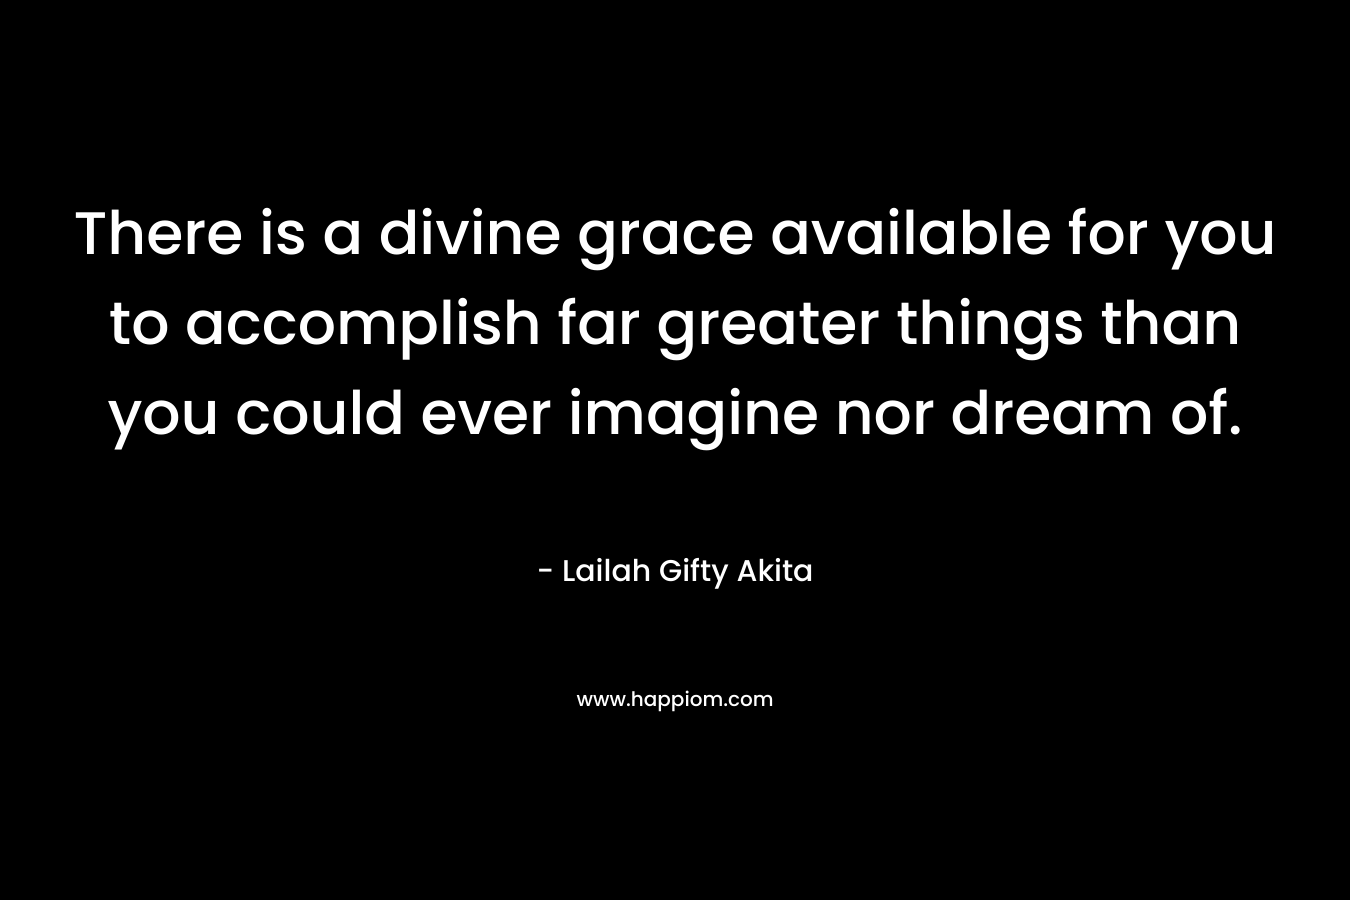 There is a divine grace available for you to accomplish far greater things than you could ever imagine nor dream of.